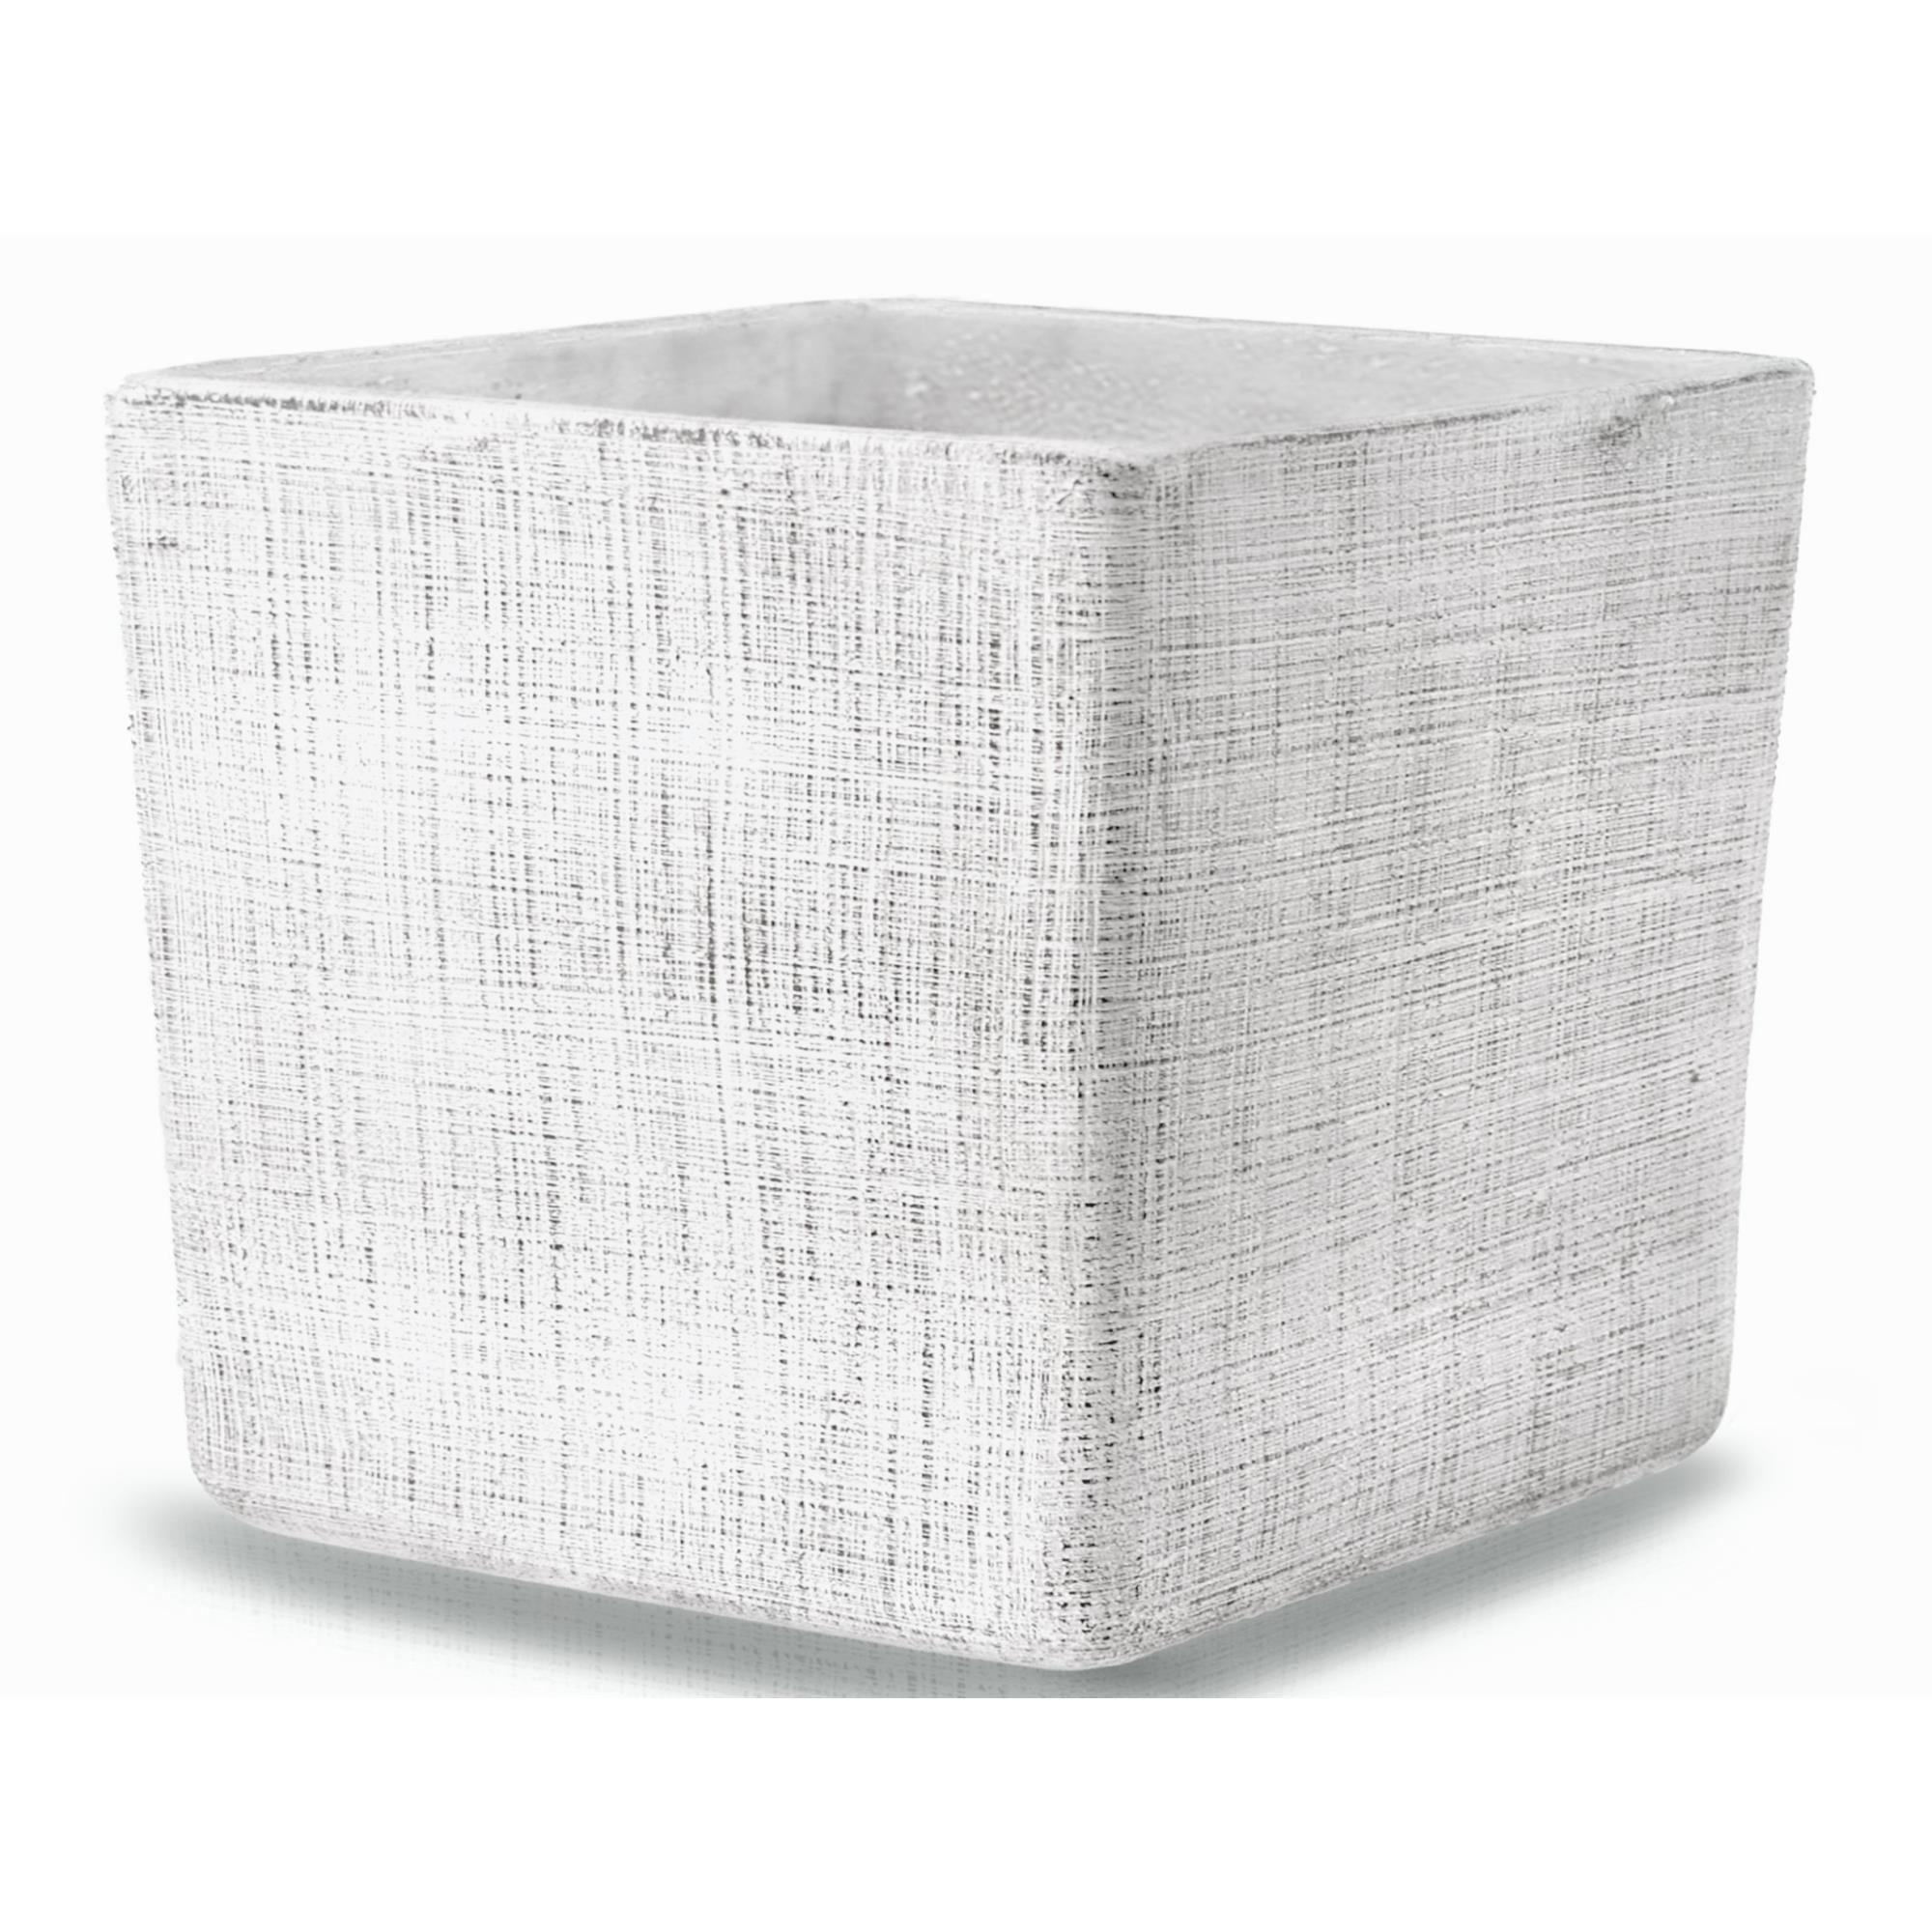 Square flower pot from the Ethno Cube collection, 14 cm